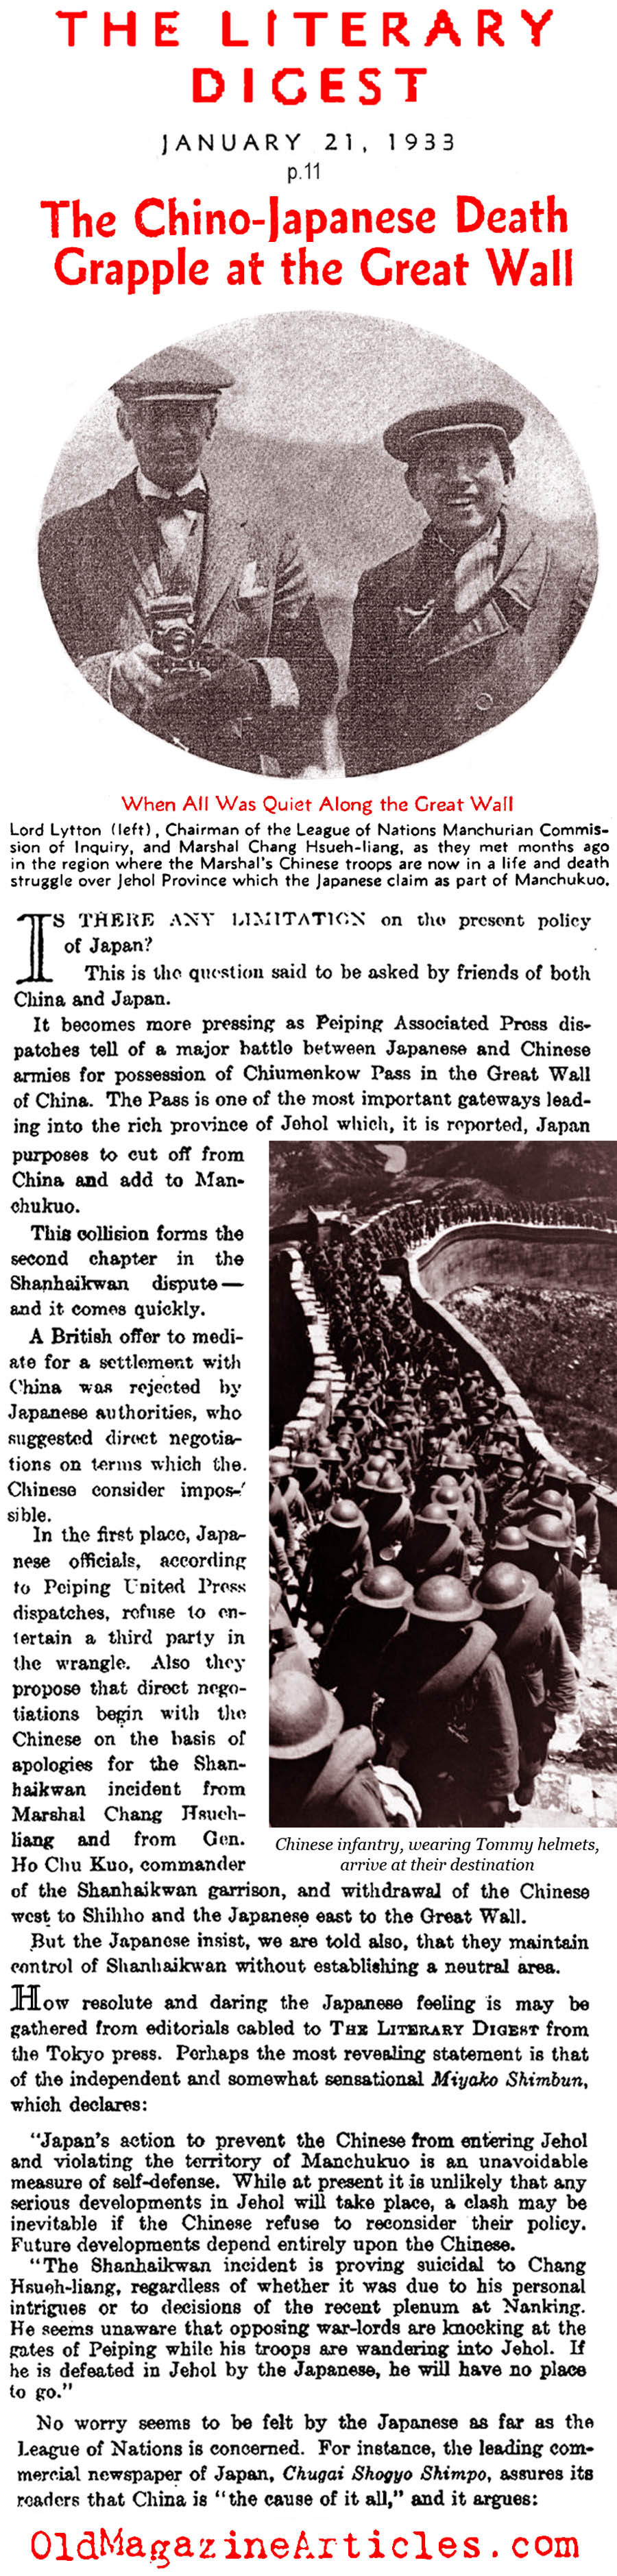 The Battle at the Great Wall (Literary Digest, 1933)